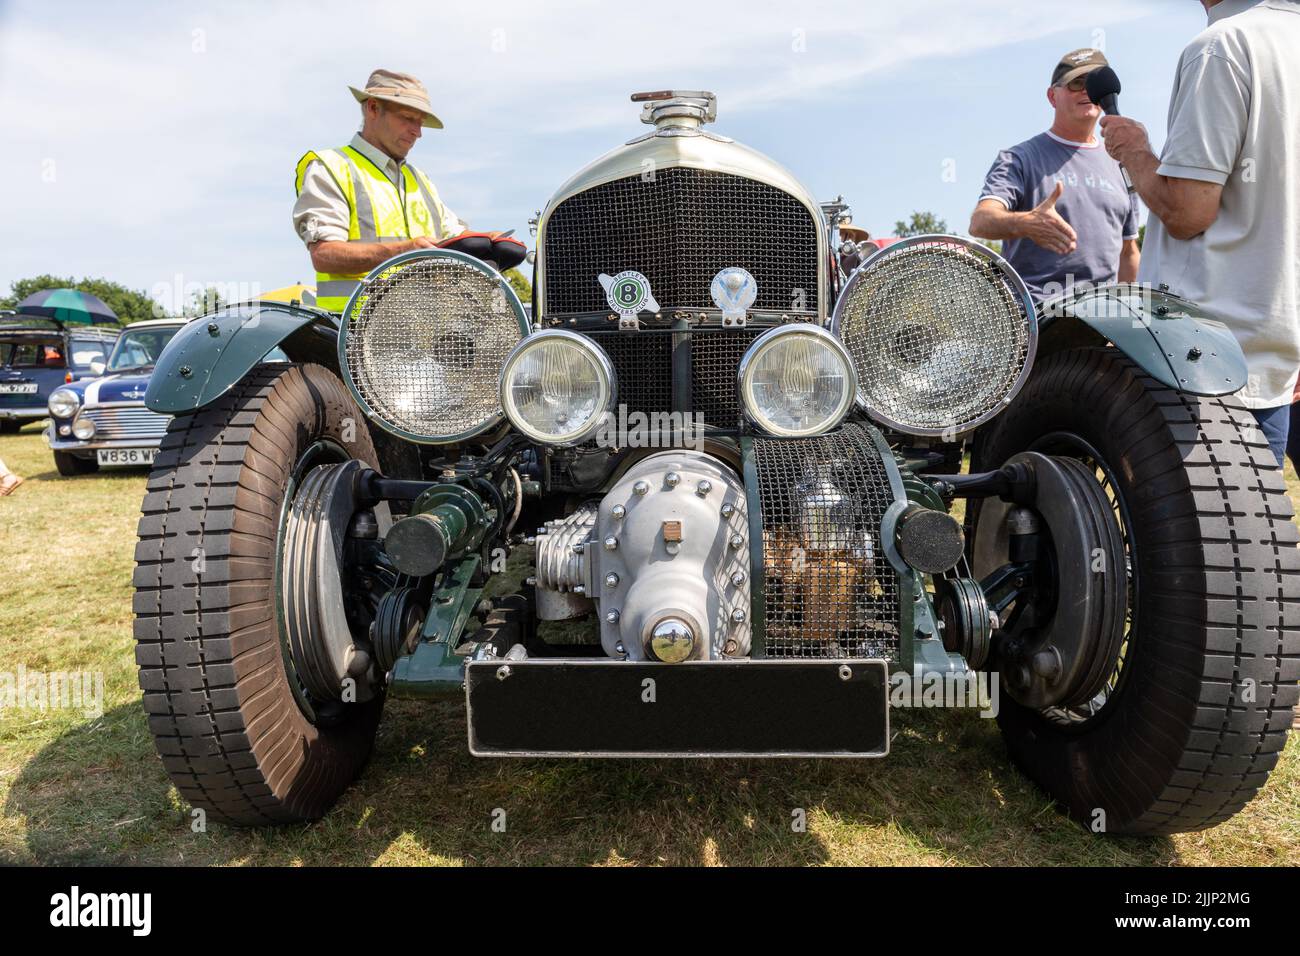 A 1929 Blower Bentley Vintage Car At The Appledore Classic Car Show in Kent Stock Photo